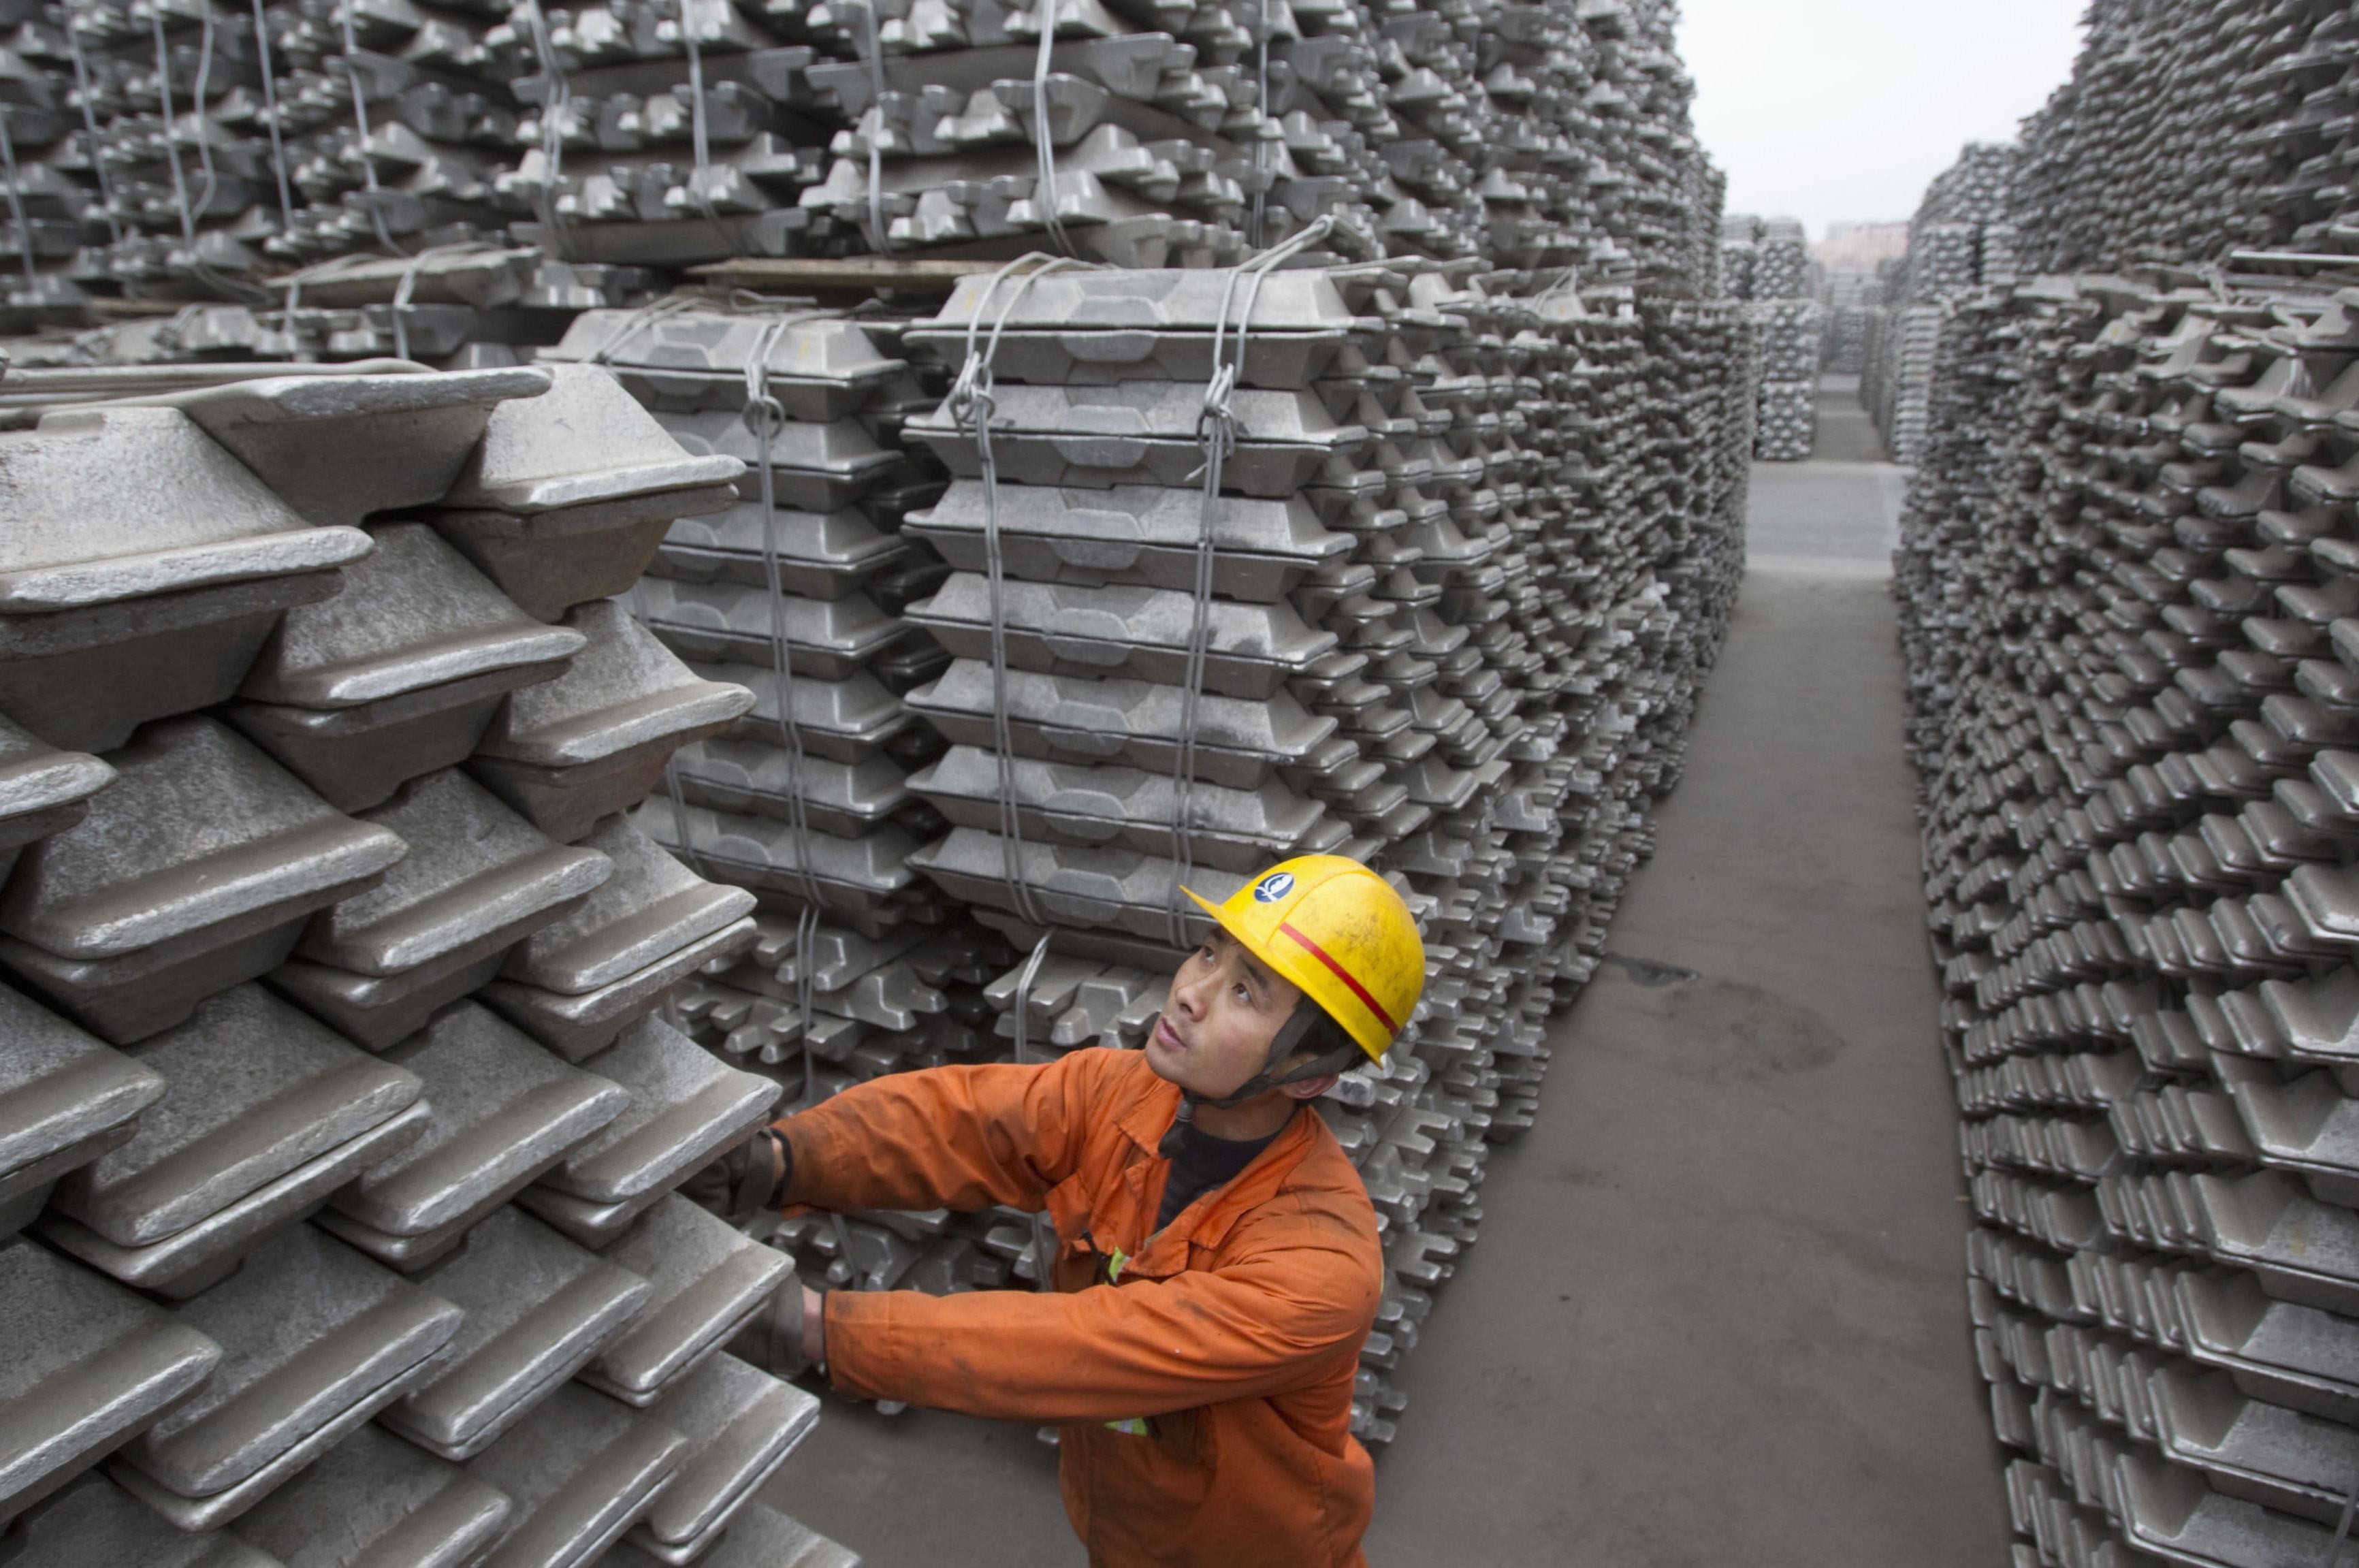 Aluminium ingots stacked for export at Qingdao Port in Shandong province on March 14, 2010. The London Metal Exchange (LME), the wholly owned unit of the Hong Kong Exchanges and Clearing Limited, is in talks with the Guangdong provincial government to open the first foreign-owned warehouse in mainland China to expand its Asia network, currently comprising Taiwan, South Korea and Singapore. Photo: Reuters